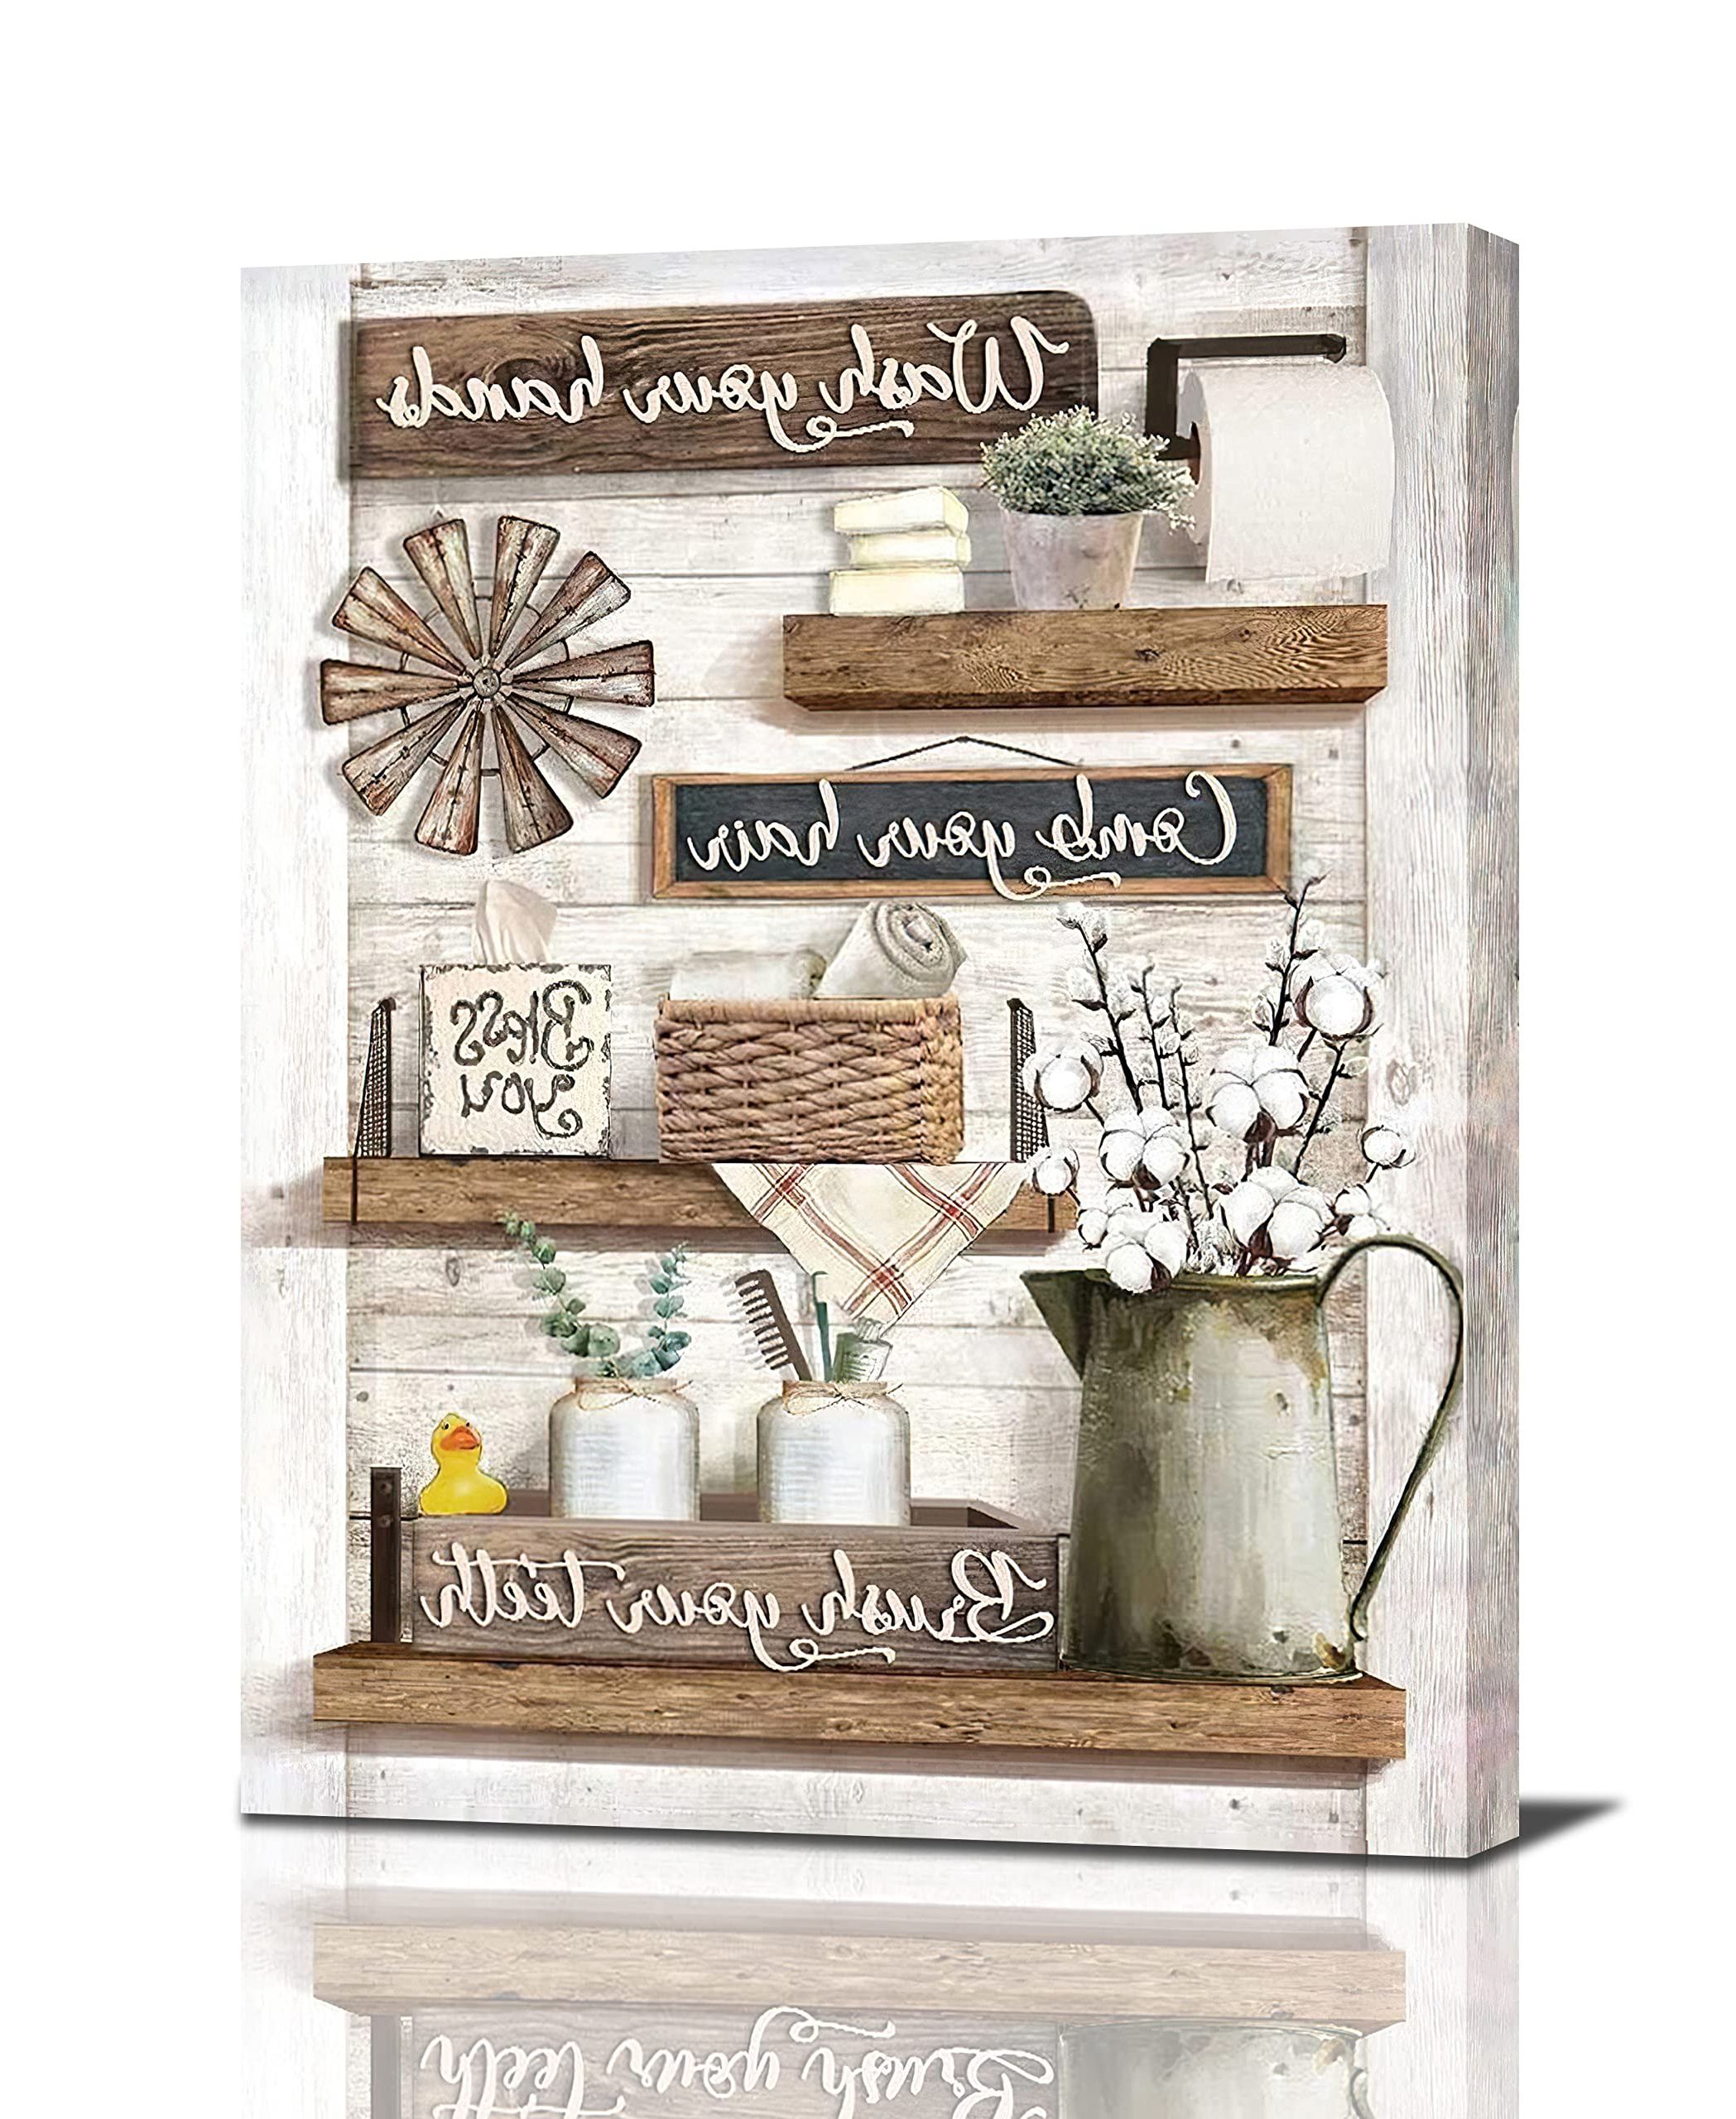 Current Rustic Decorative Wall Art Regarding Amazon: Fuzawet Farmhouse Bathroom Decor Wall Art Rustic Bathroom  Pictures Canvas Print Country Bathroom Signs Painting Artwork Modern Home  Decorations For Bathroom Framed Ready To Hang 12x16in : Home & Kitchen (View 2 of 15)